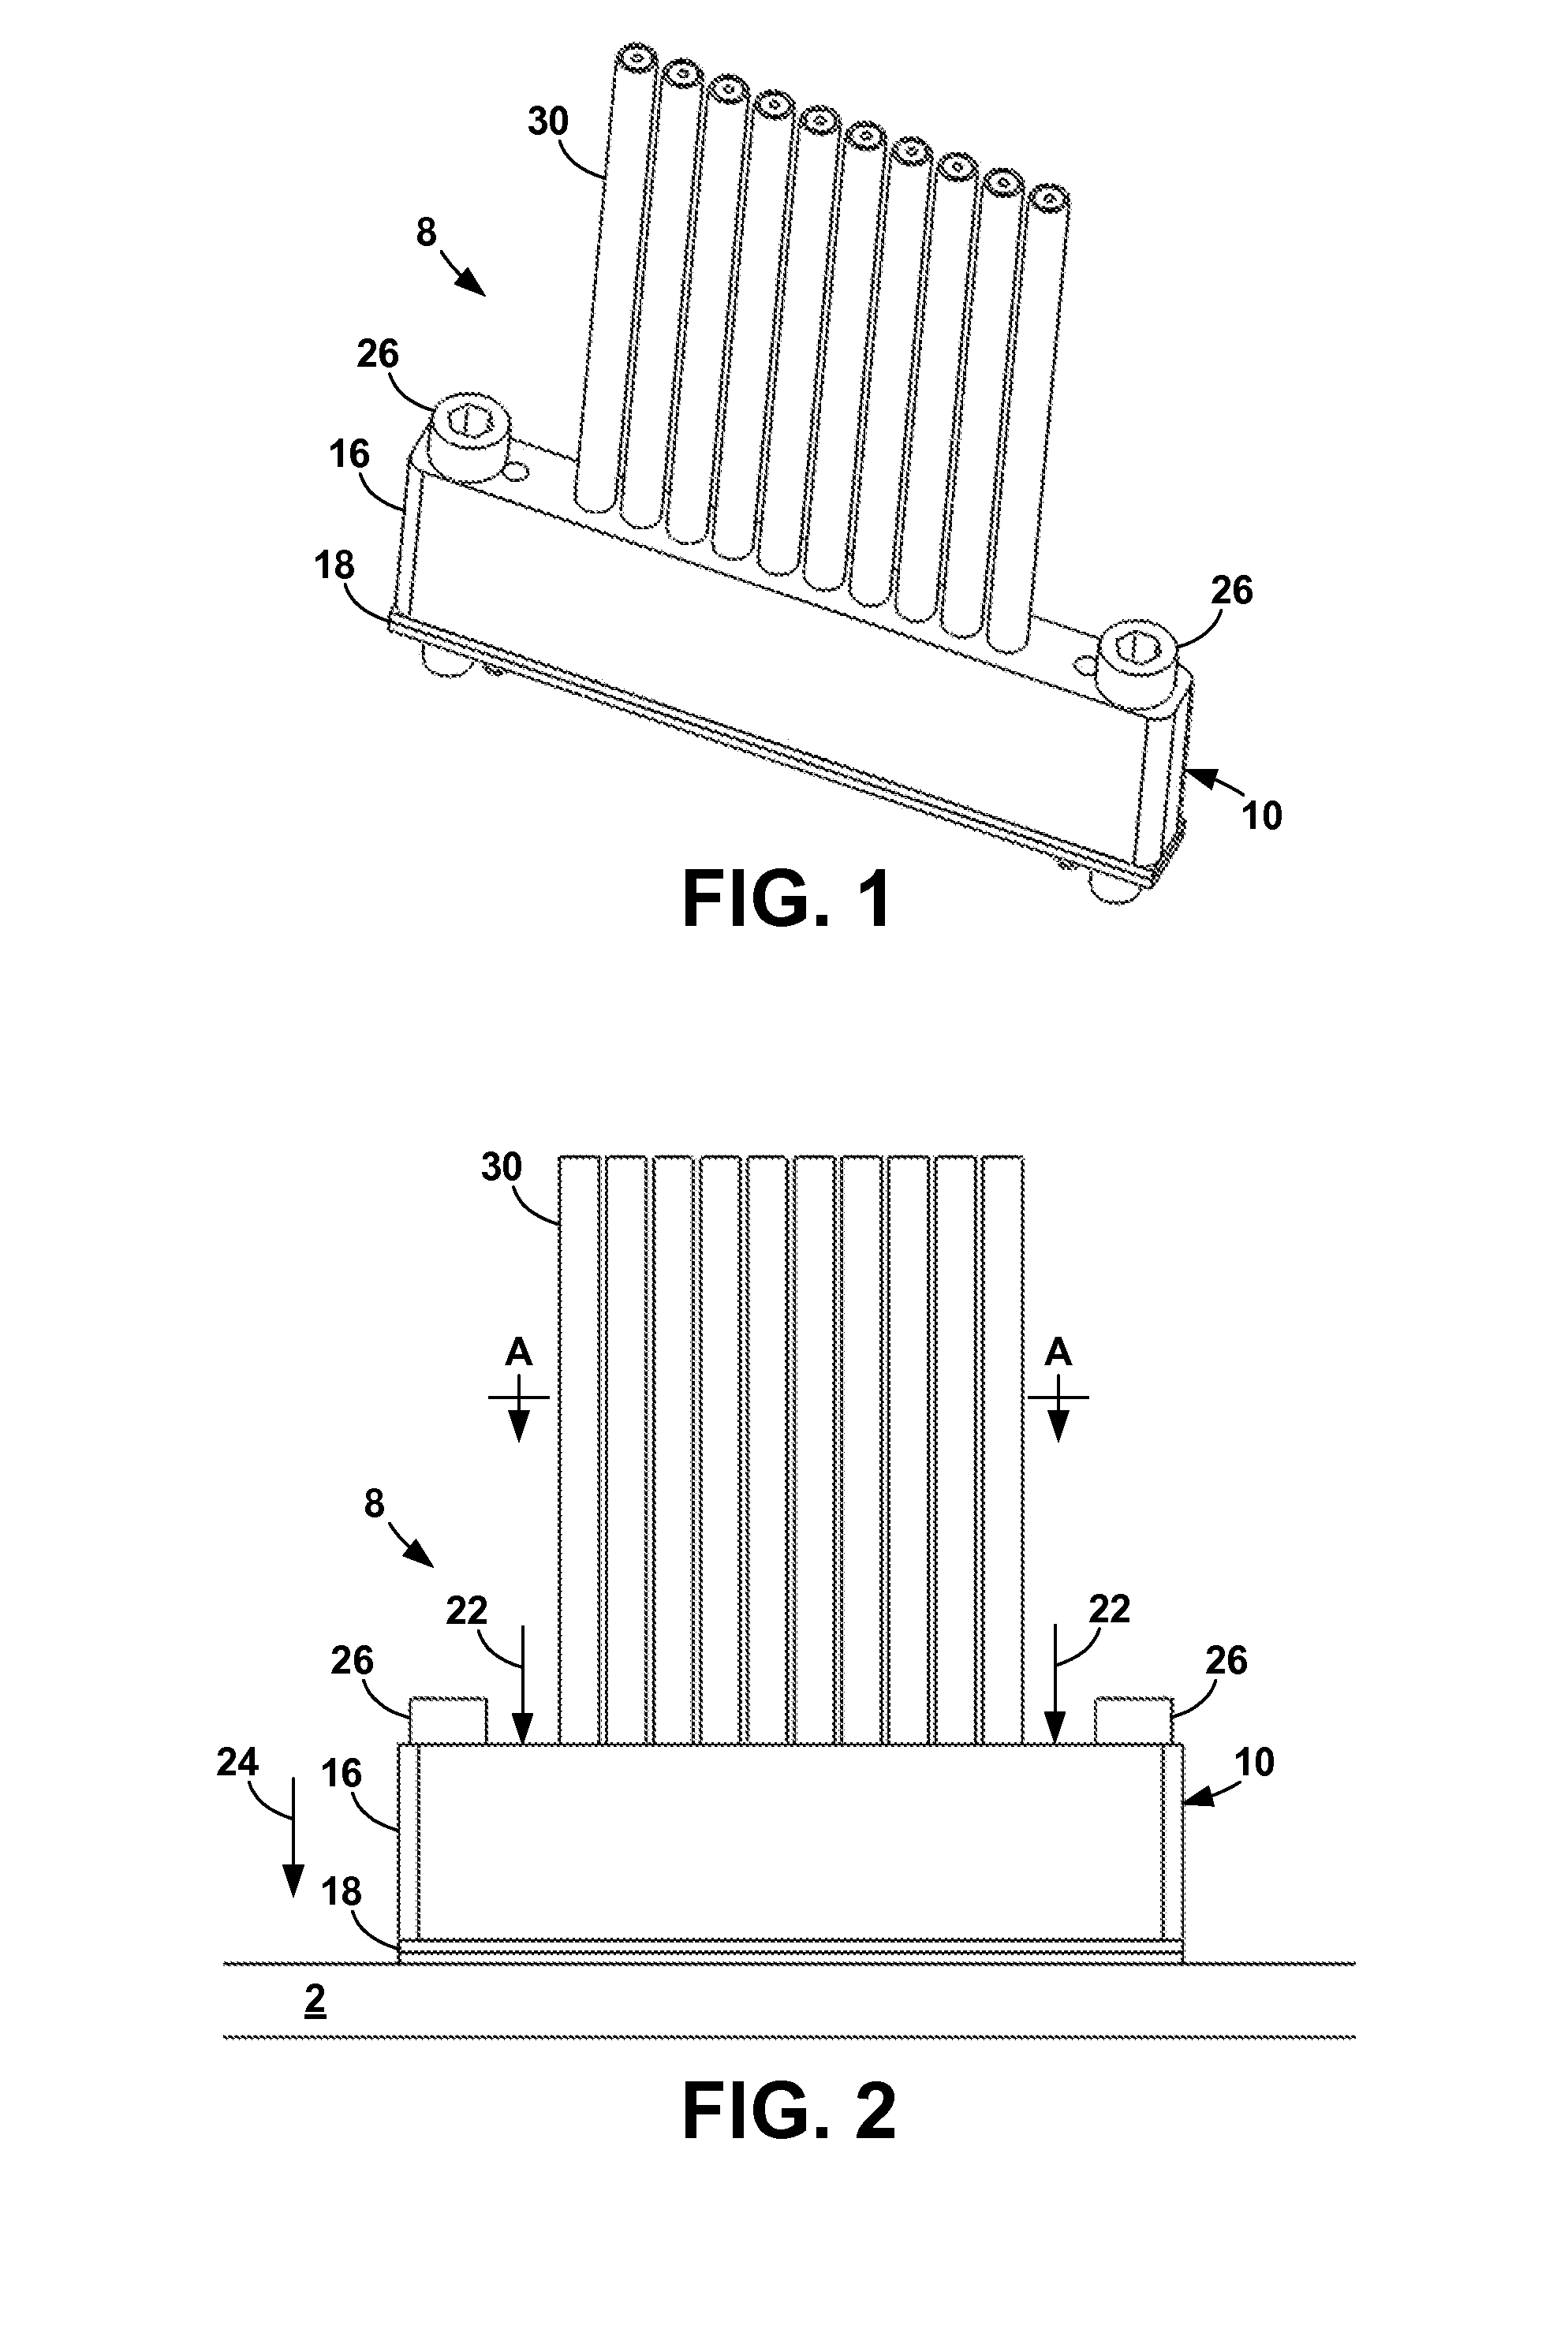 Controlled-Impedence Cable Termination Using Compliant Interconnect Elements